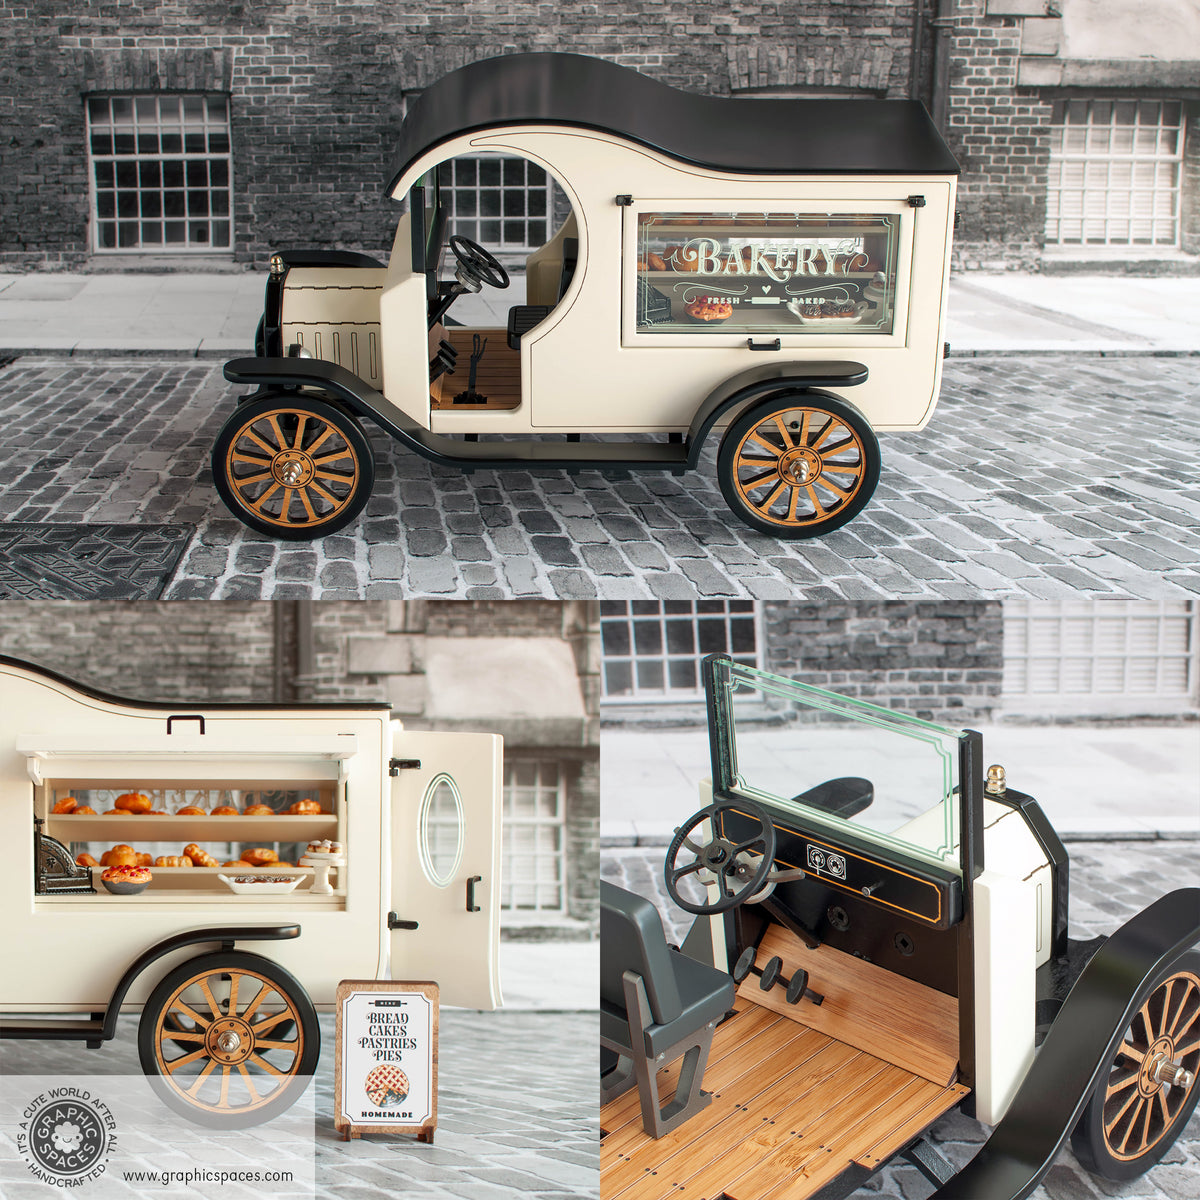 1:12 Scale Room Box White Bakery Shop Truck Model T C Cab. Detailed view of dash, floor, steering wheel, seat. No chassis.